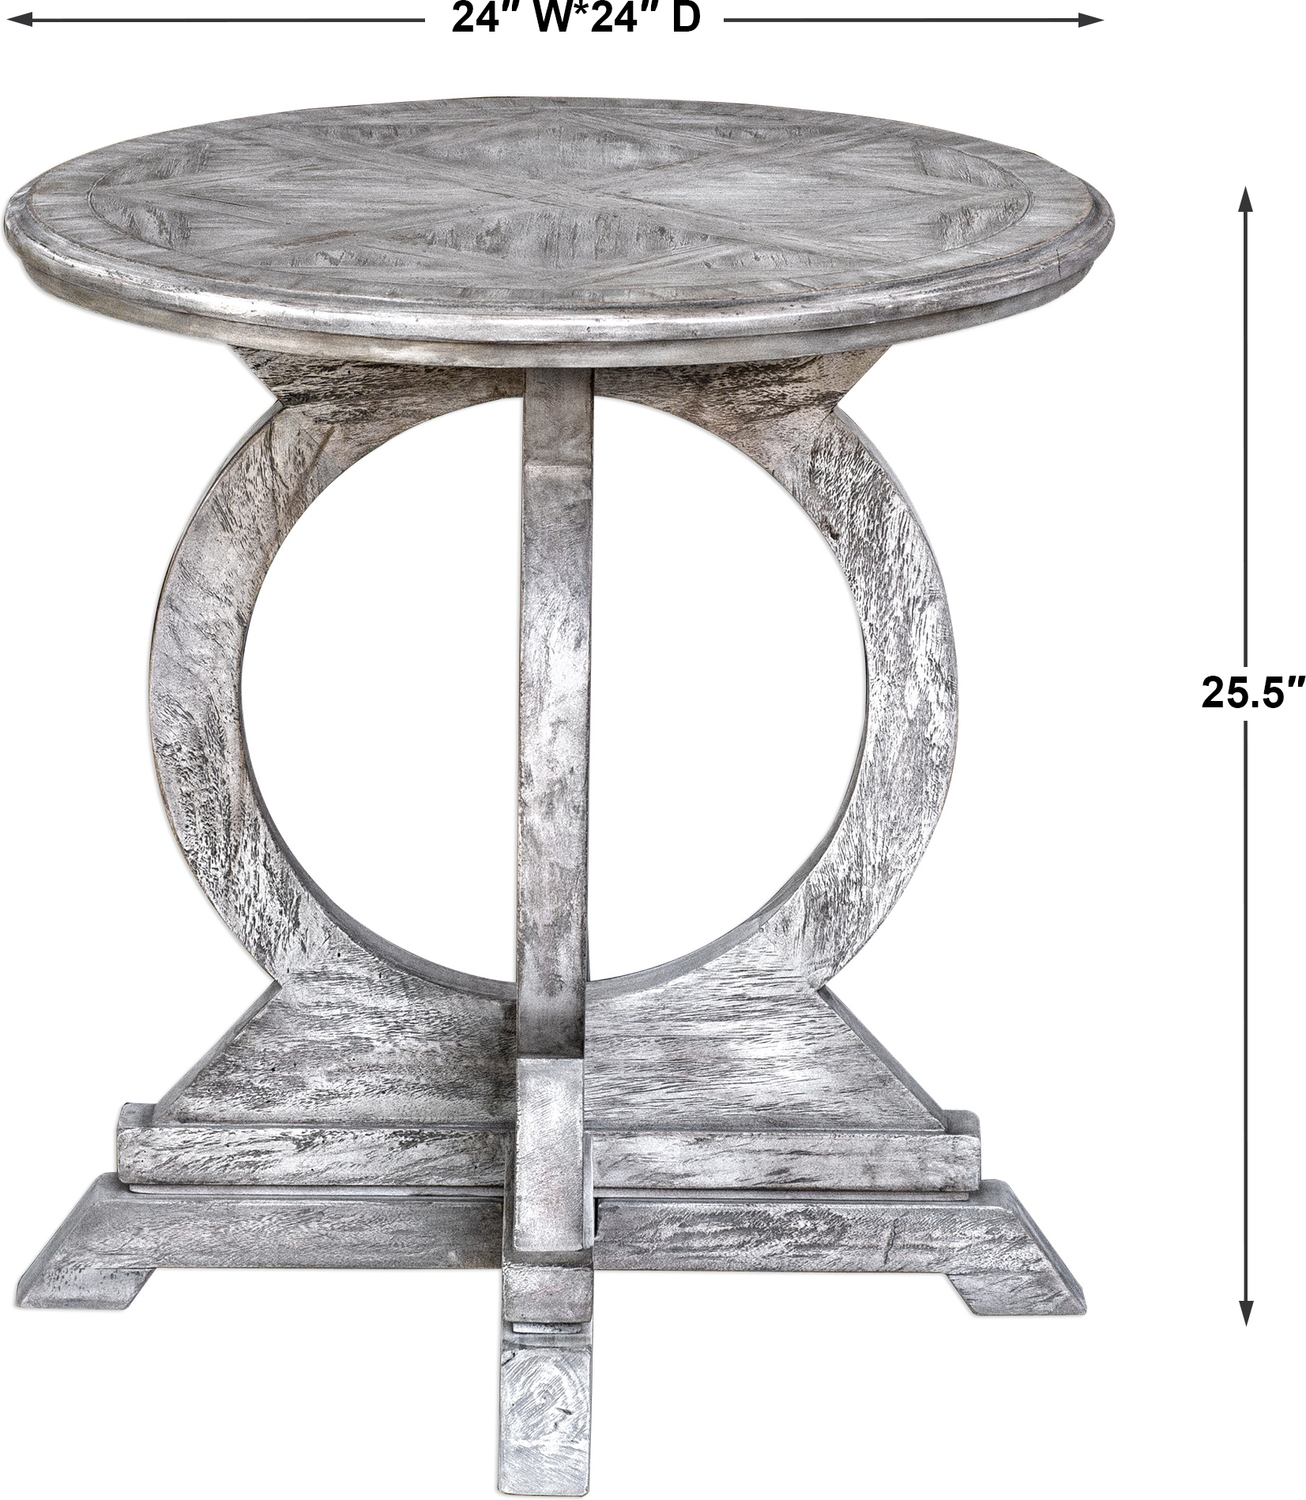 side table decor ideas living room Uttermost Accent & End Tables Soft, Aged White Finish On Solid Mango Wood Circle Motif Base, With Rub-through Distressing On The Mindi Veneer Inlay Top.